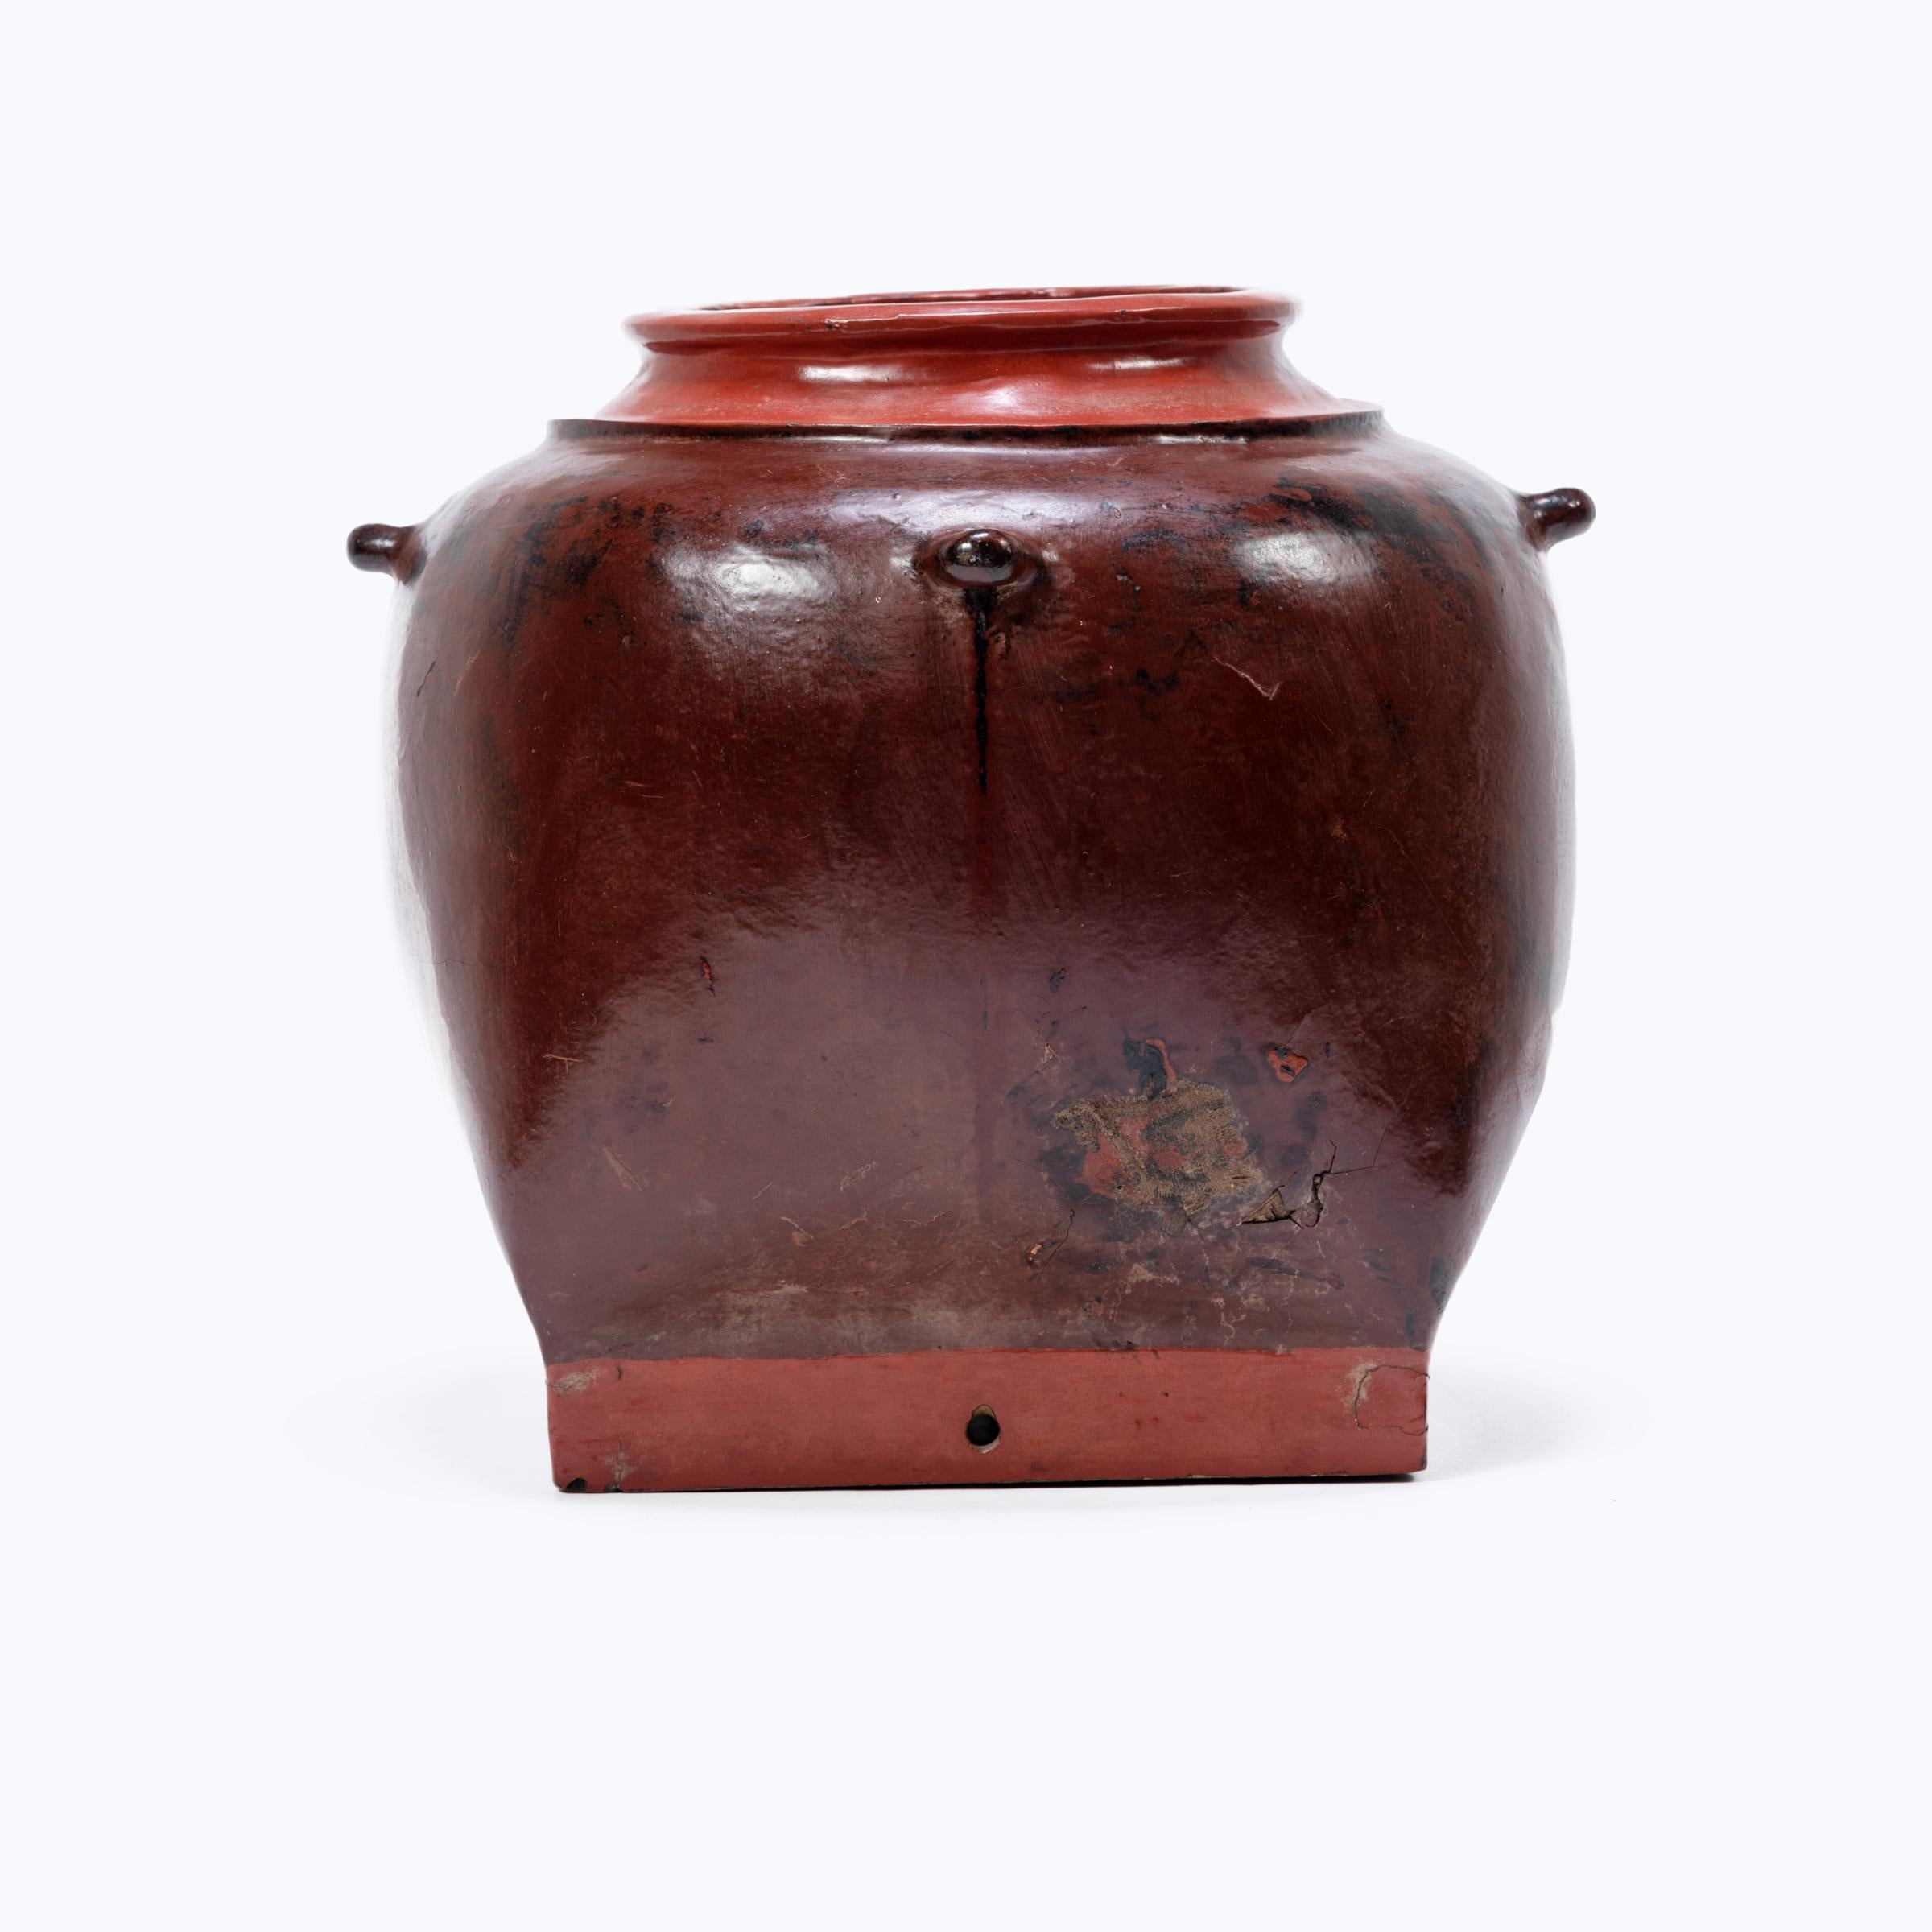 This round Burmese vessel was likely designed as hanging storage for everyday use. A thin core structure of wood and clay was then cloaked in red cinnabar lacquer for stability and decoration. The remarkably lightweight vessel is wonderful as a